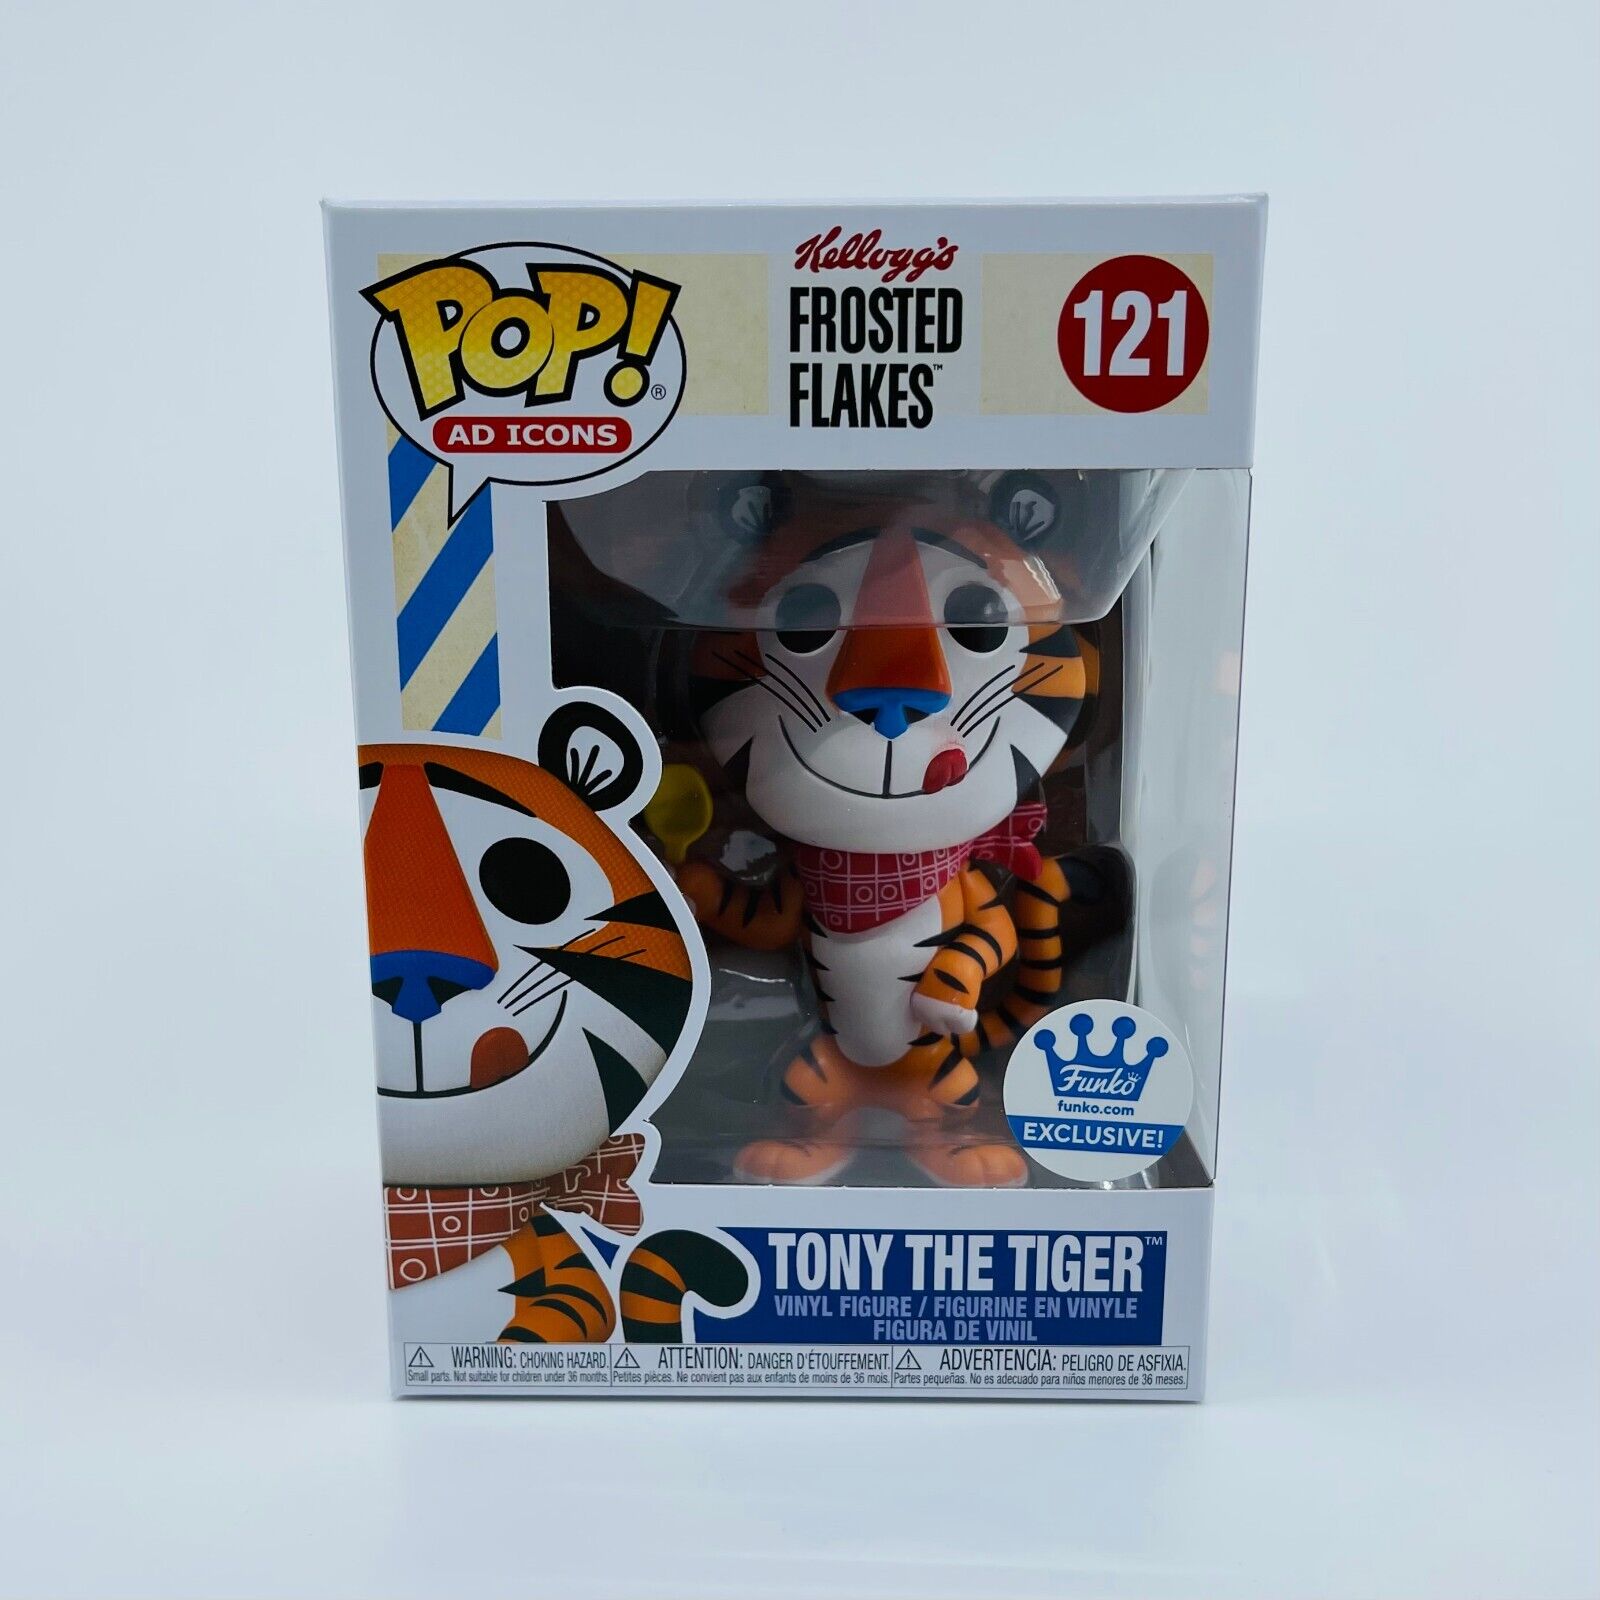 Funko Pop AD Icons - Tony the Tiger #121 (Funko Shop Exclusive), Frosted Flakes